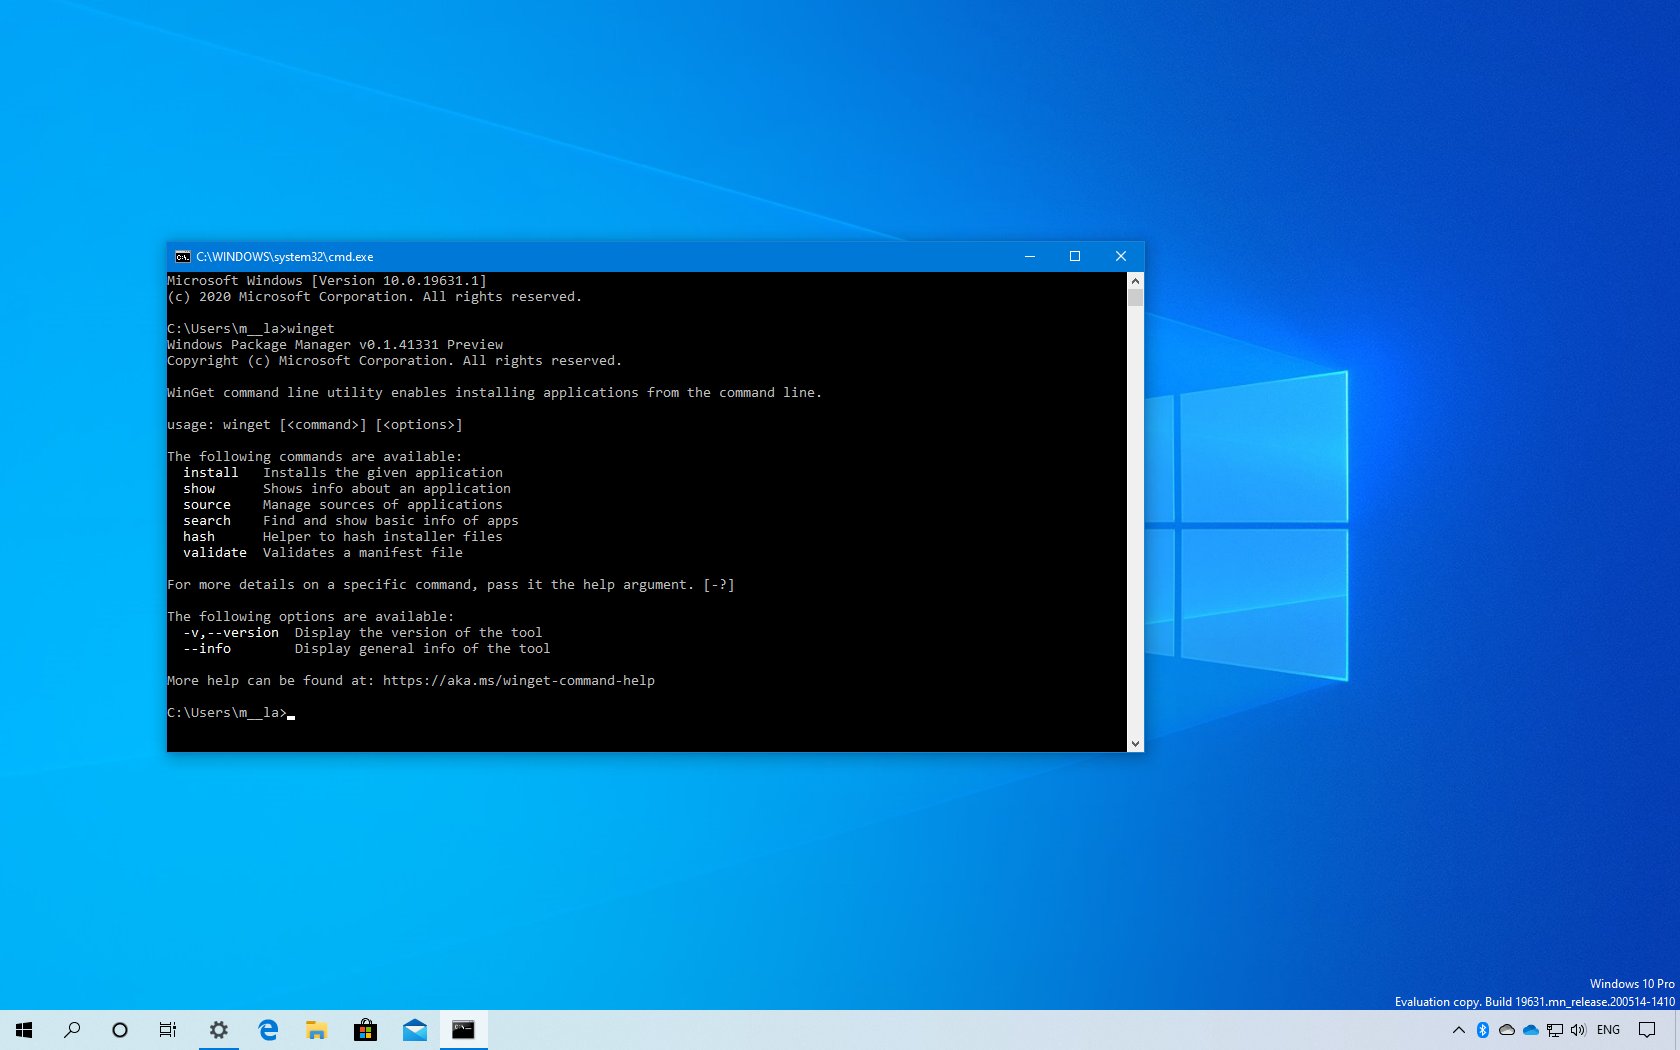 Windows Package Manager on Windows 10